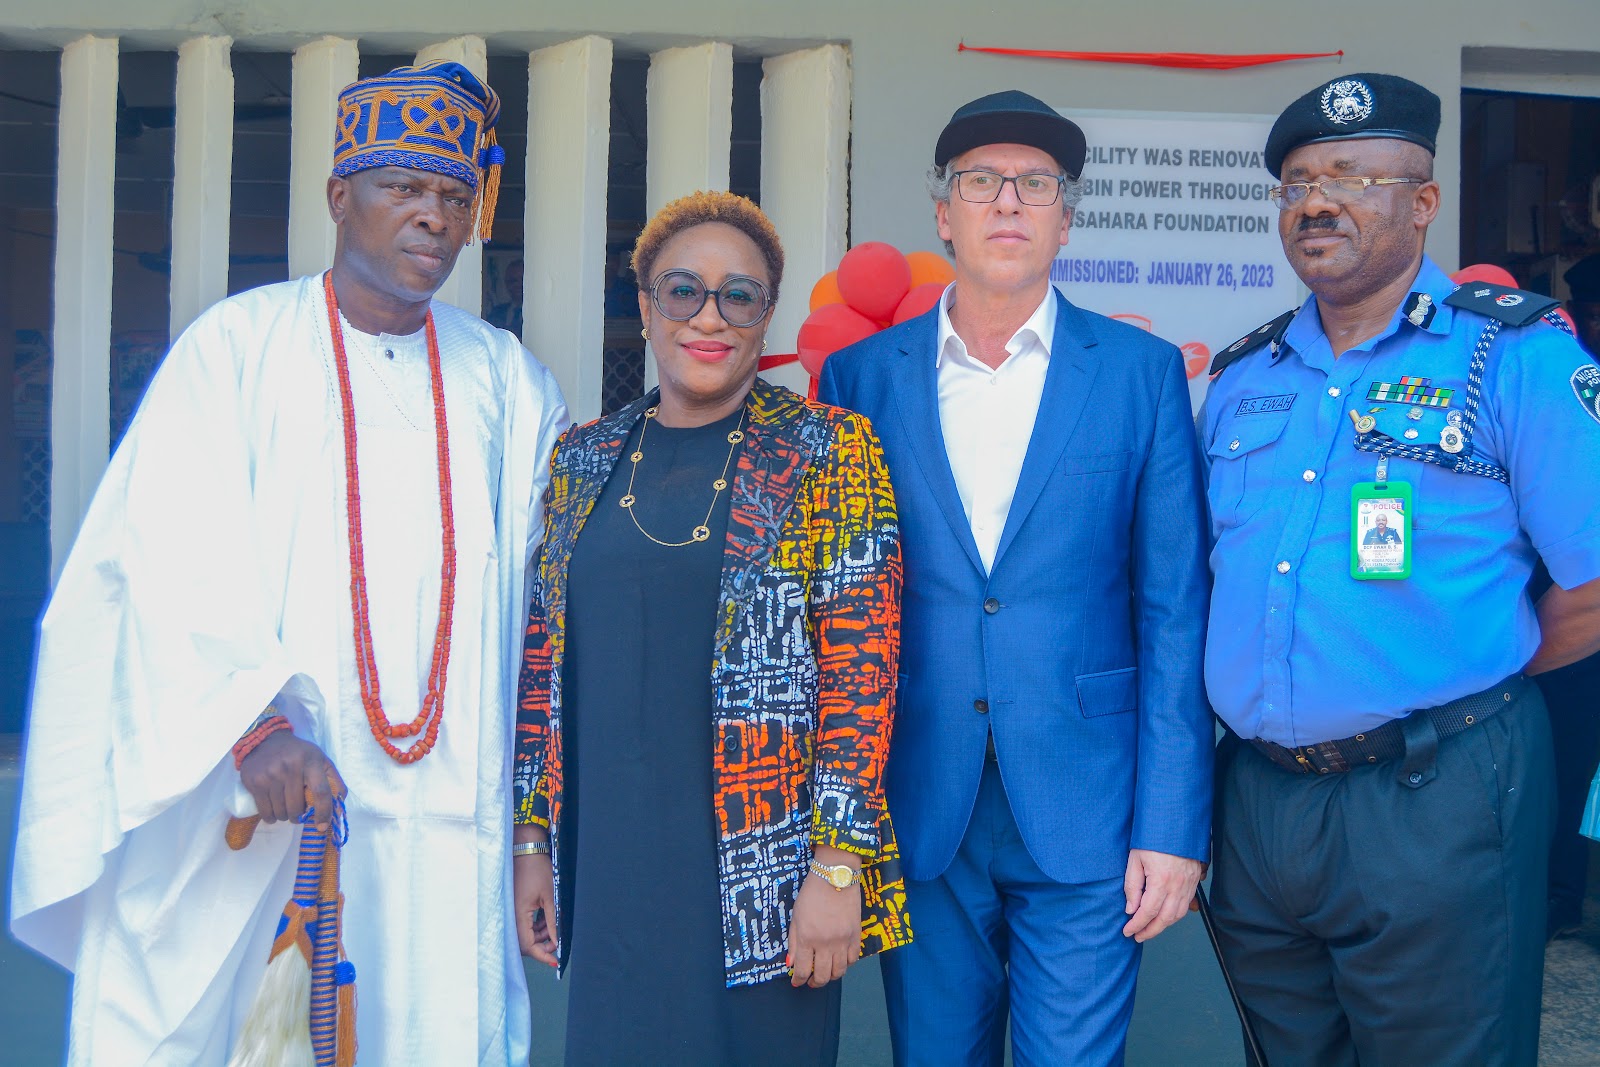 Sahara Foundation, Egbin Power Upgrade Ijede Police Station To Improve Security, Deepen Sustainability